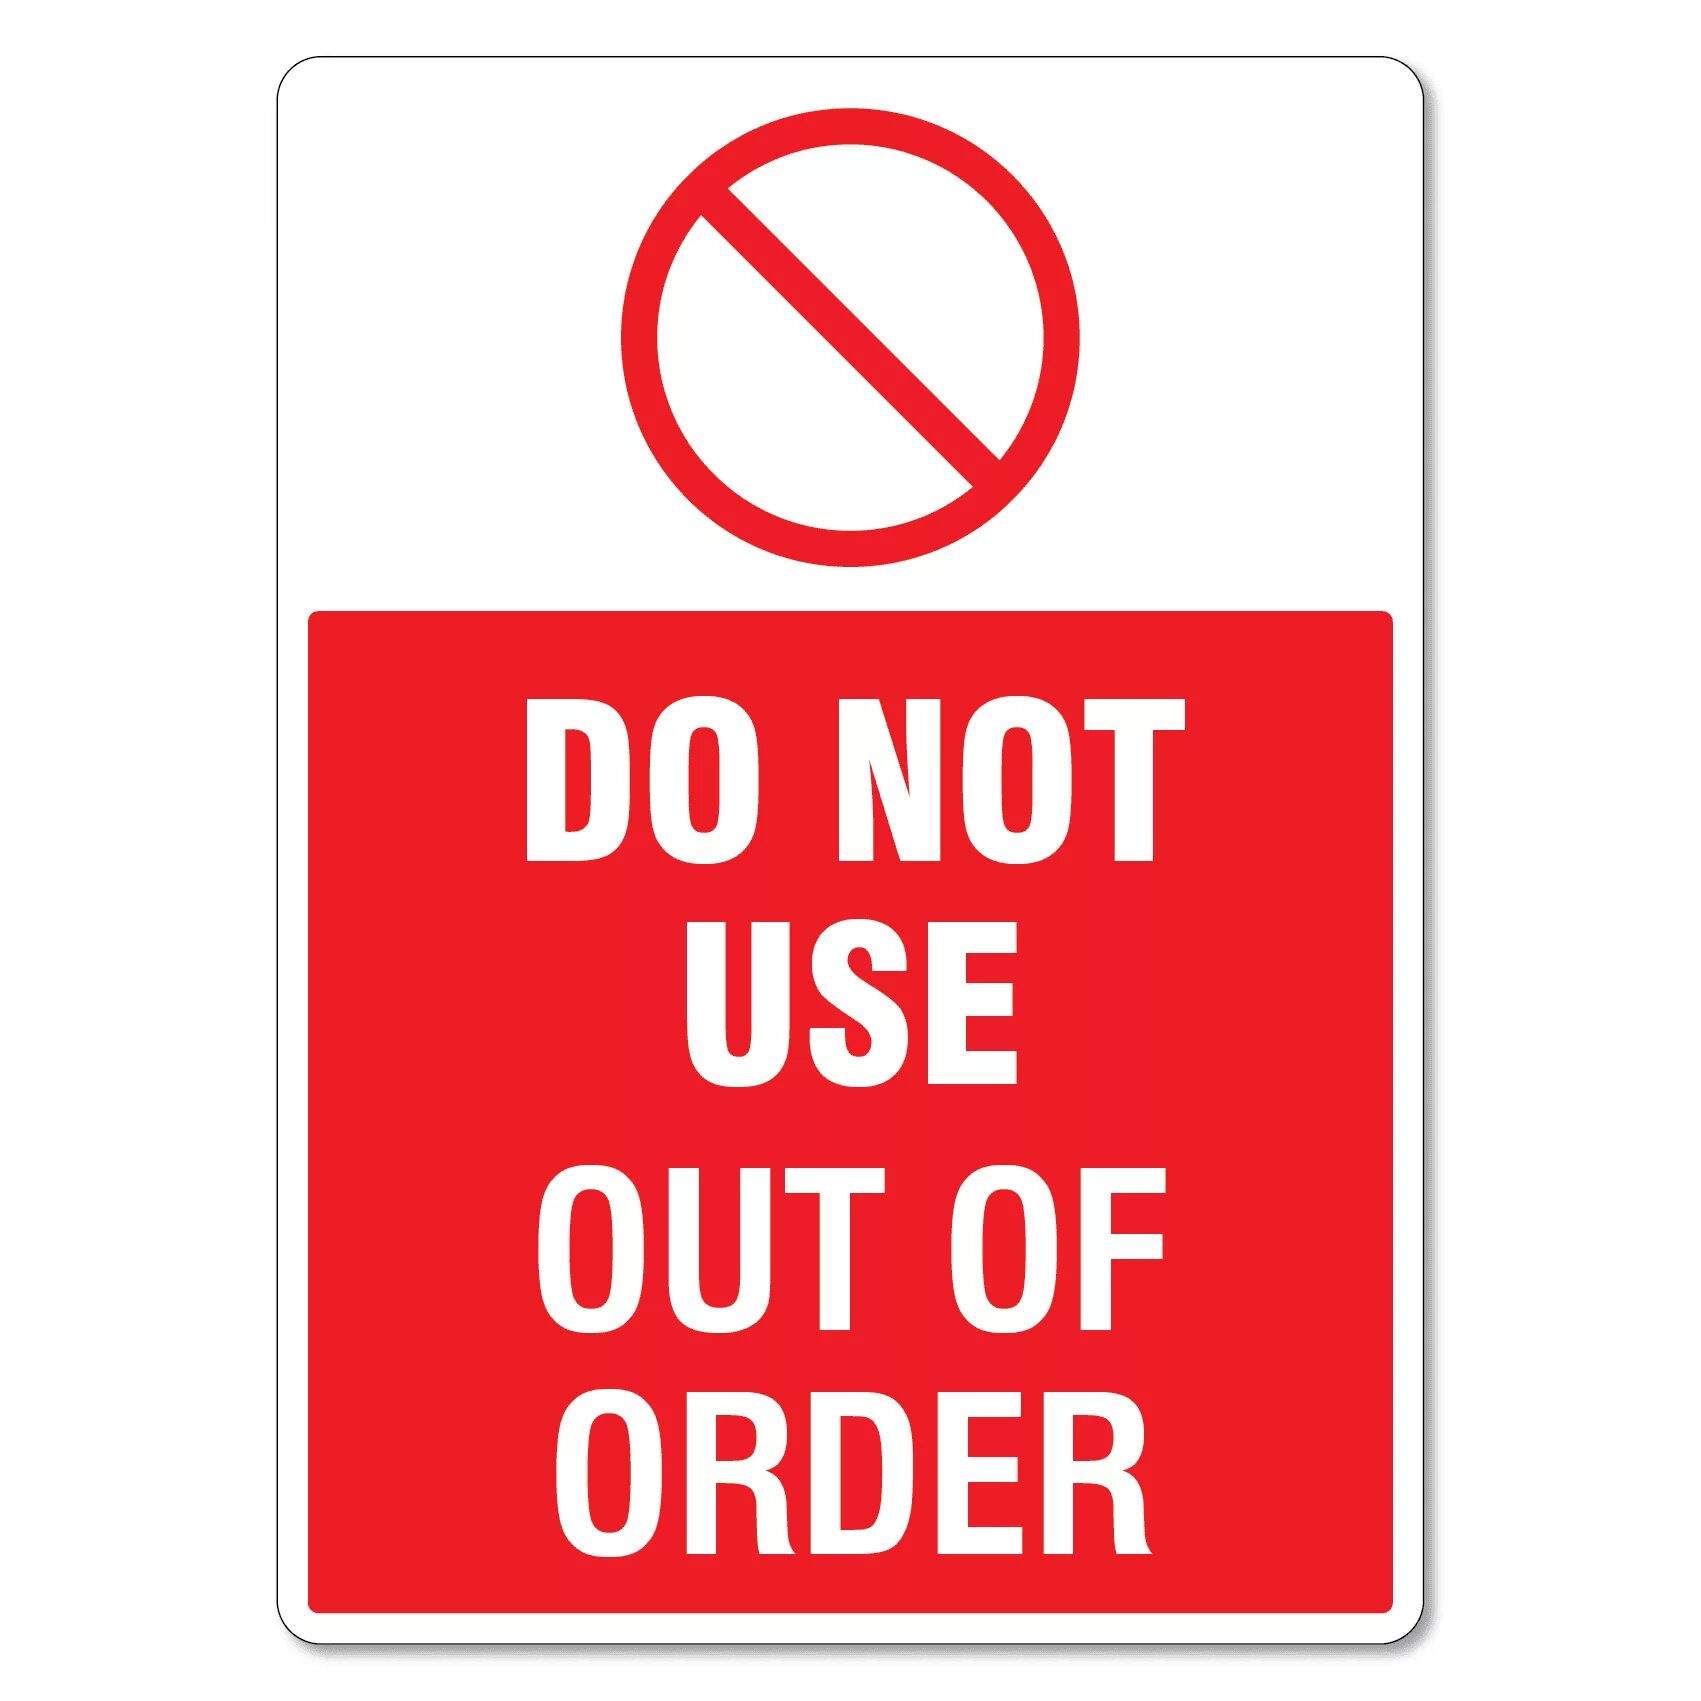 Order signs. Out of order. Sorry out of order. Out of order sign. Out of order картинка.